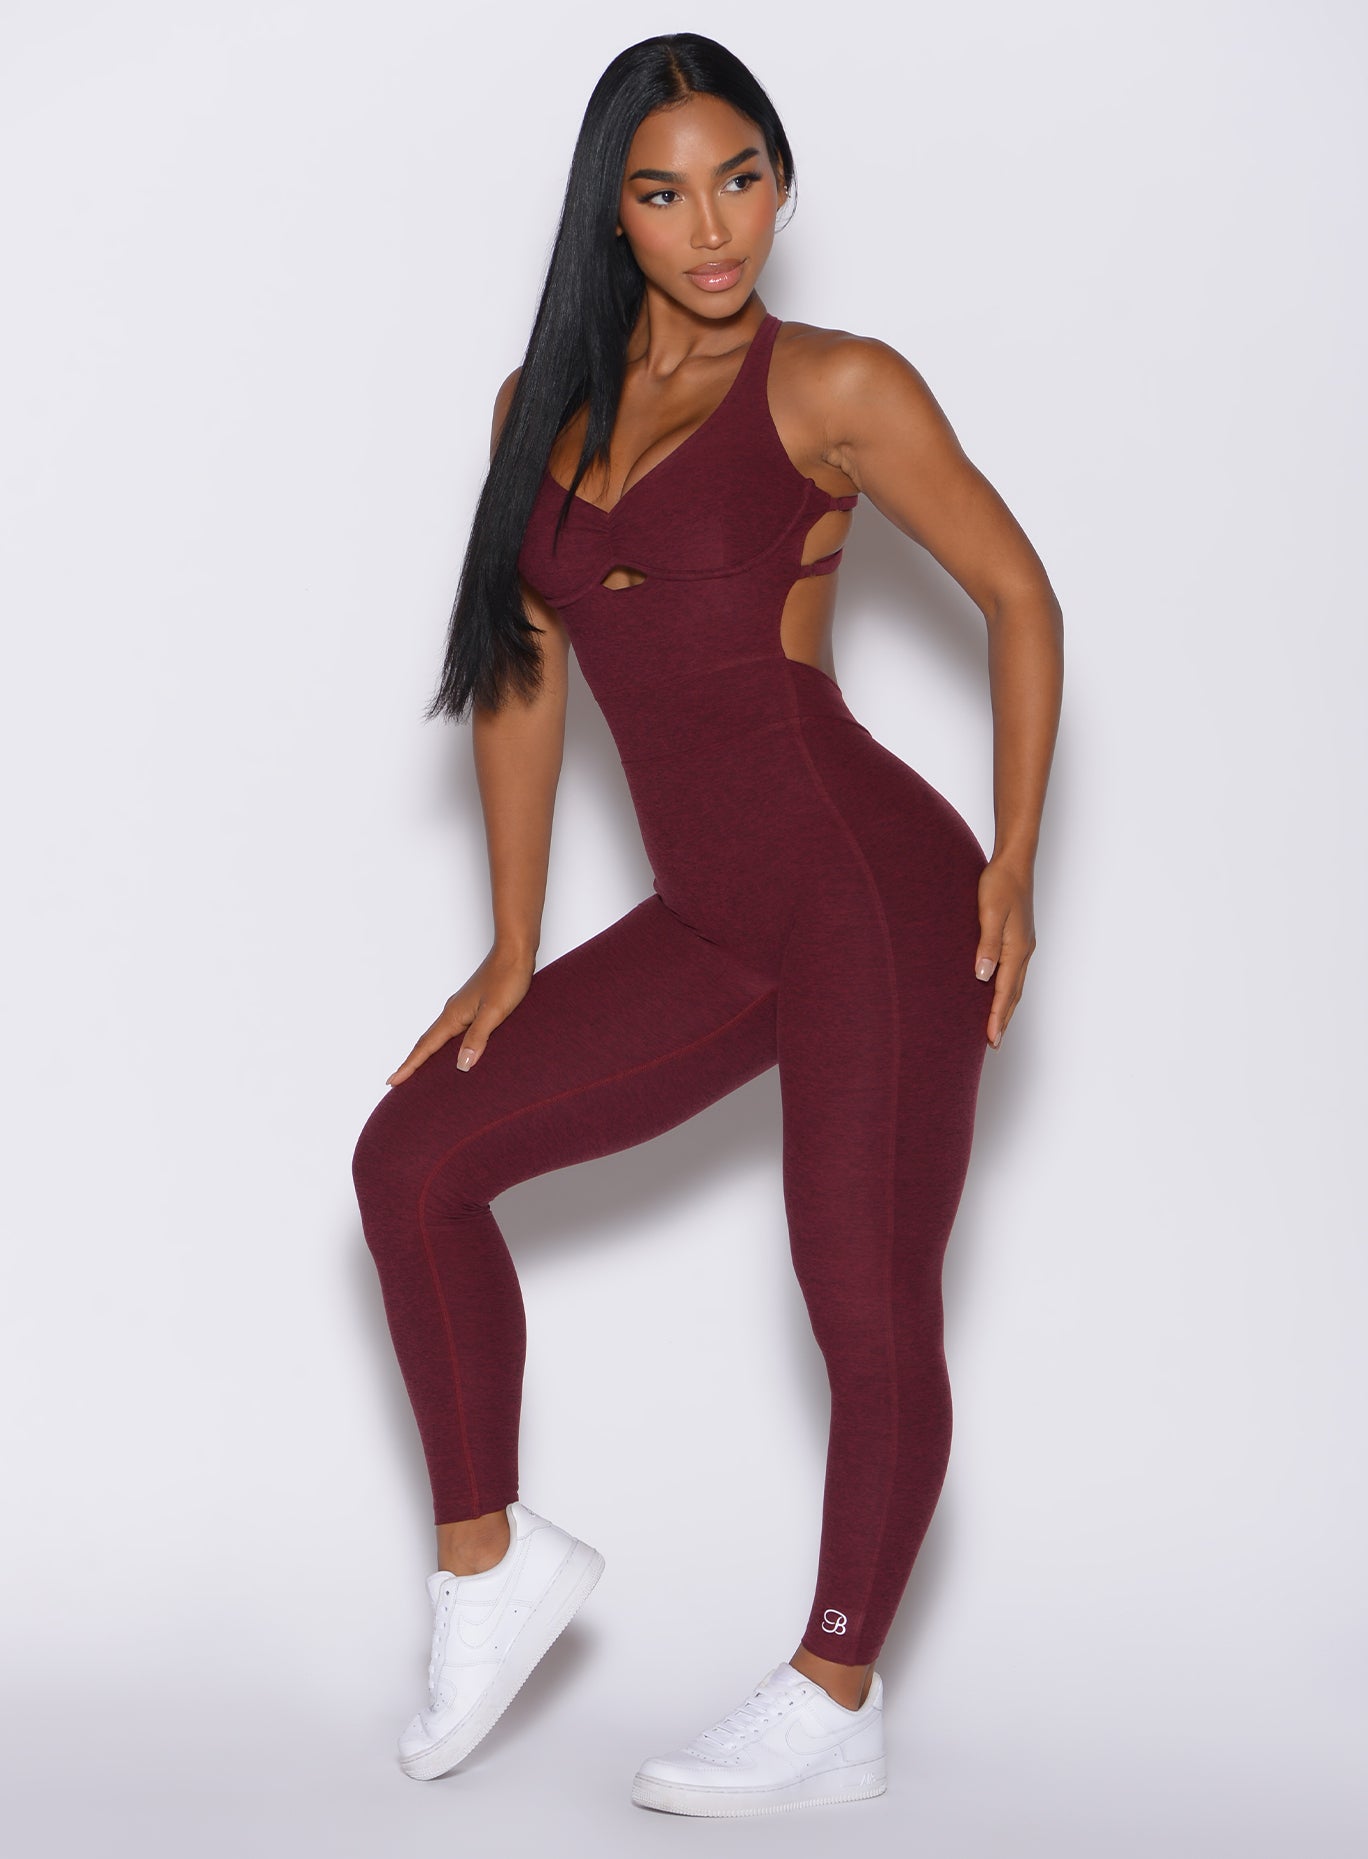 Front profile view of a model wearing our bombshell bodysuit in red wine color